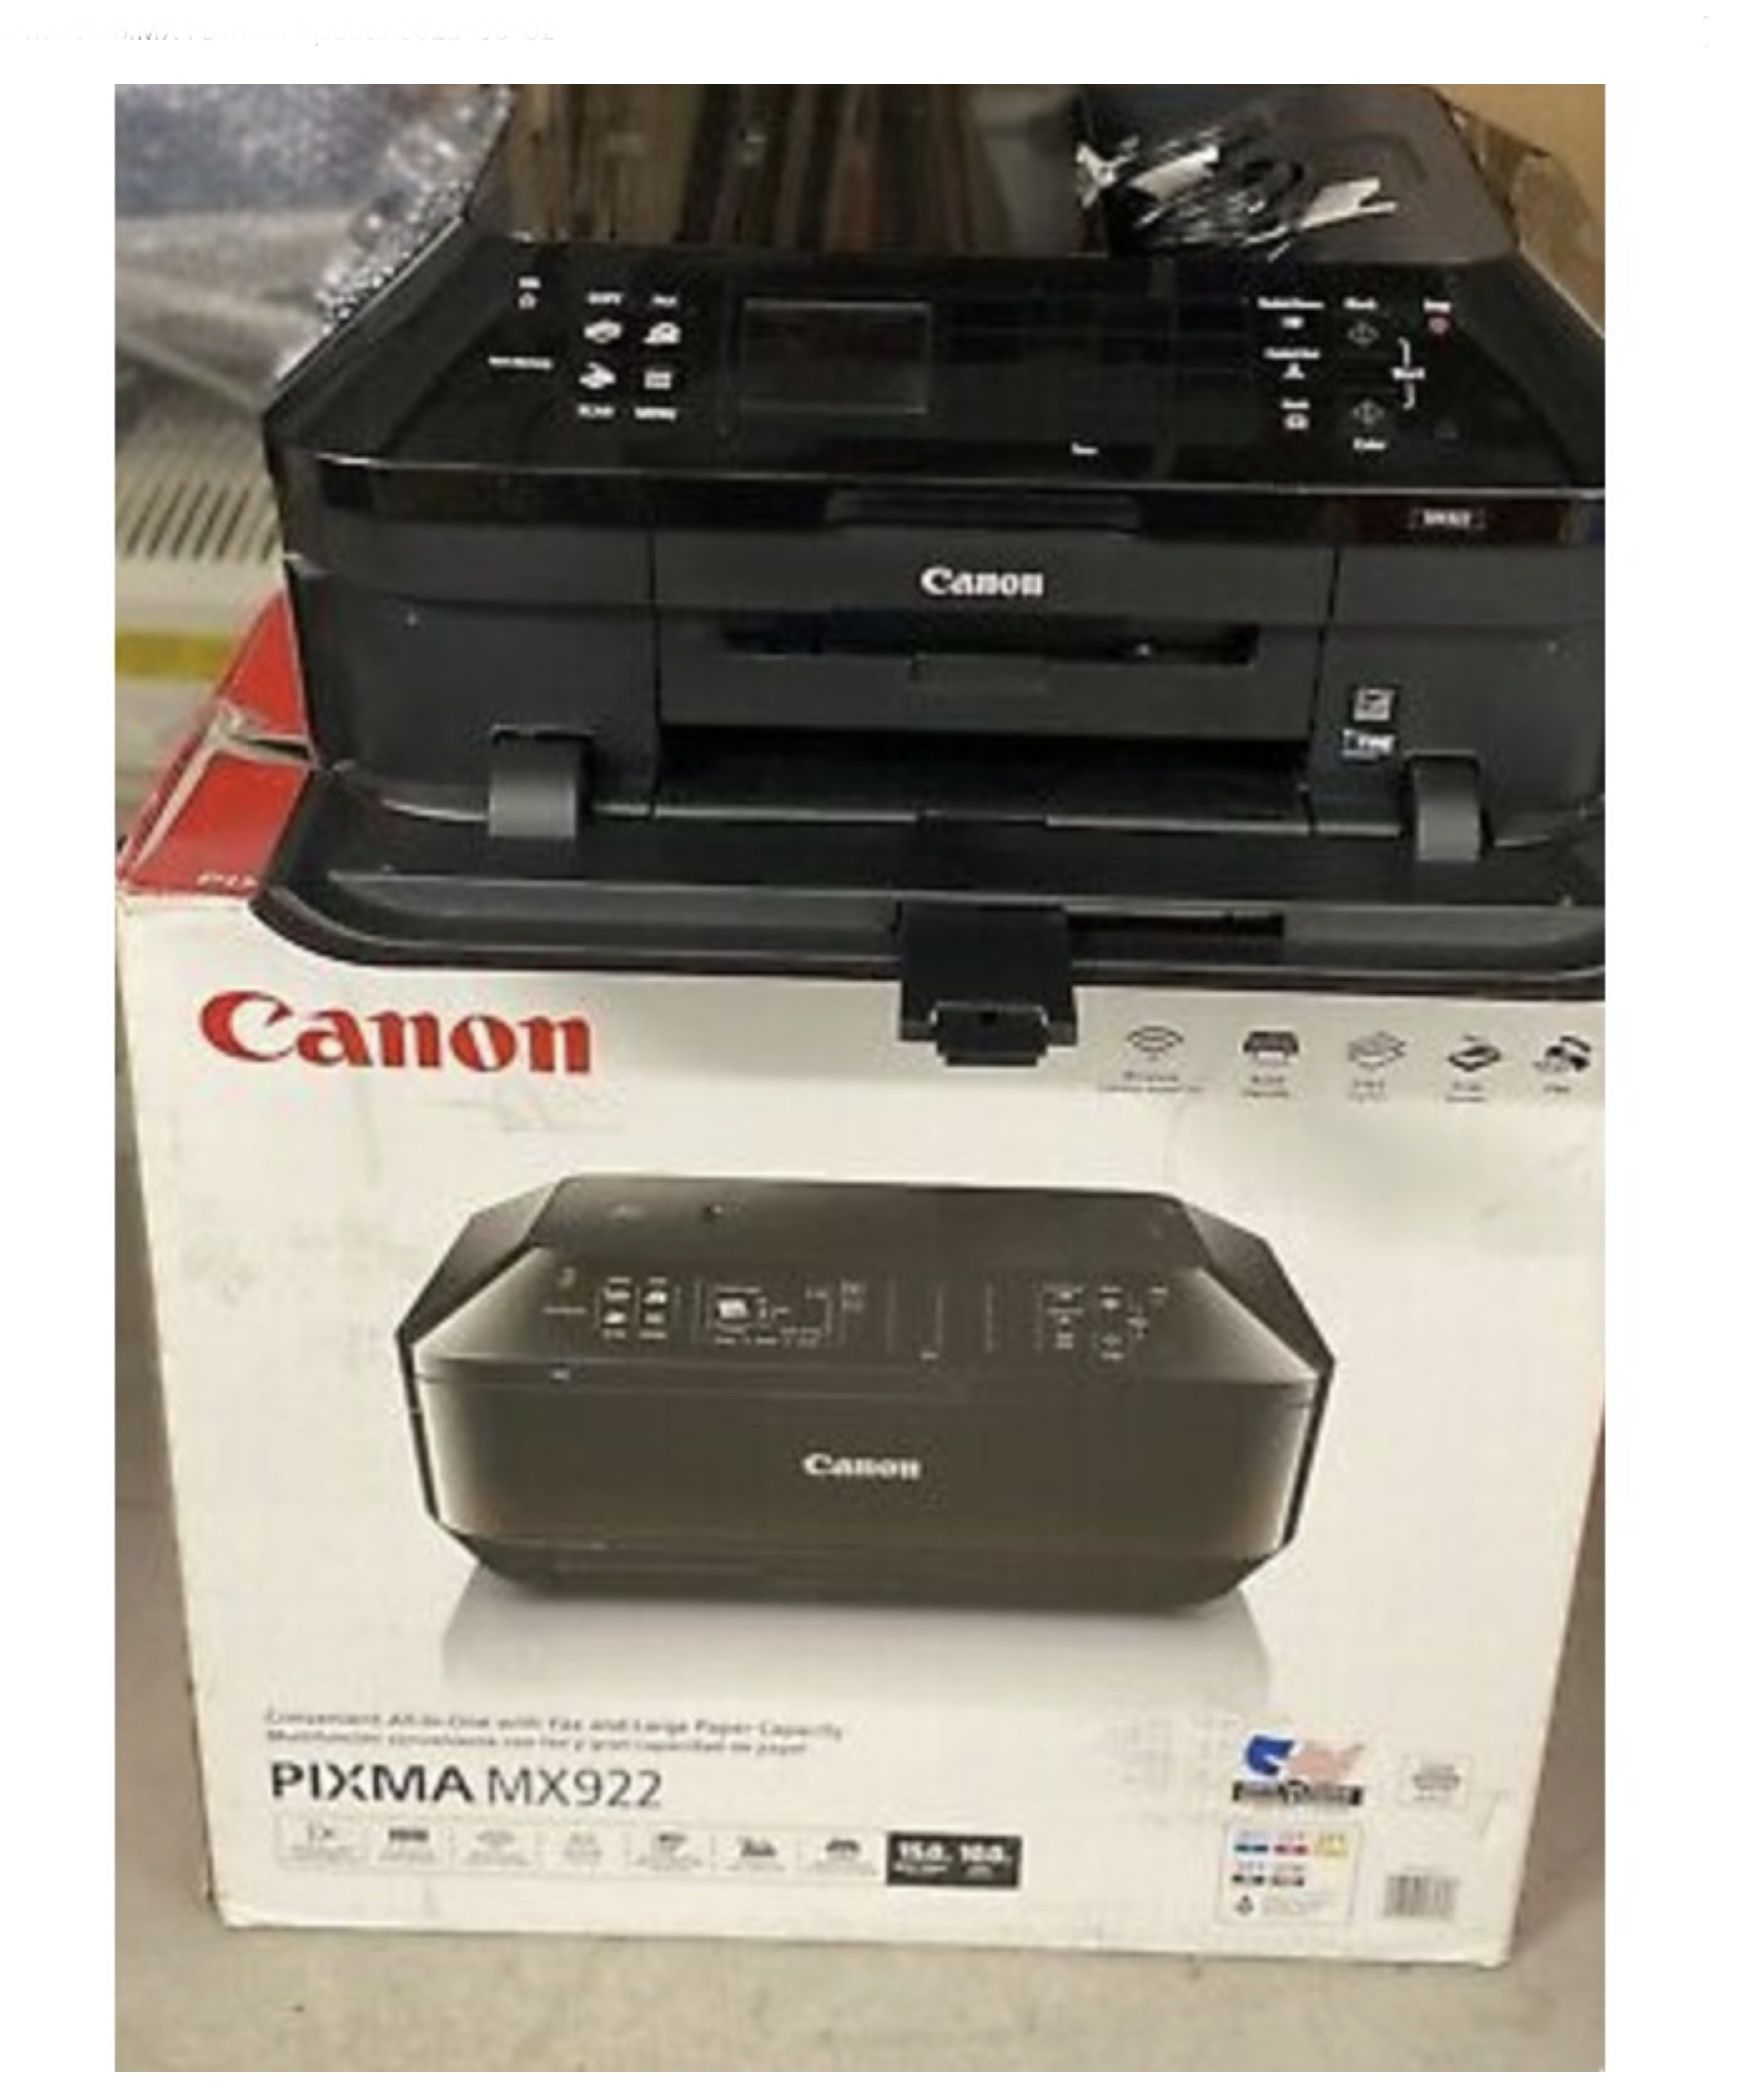 Shaded deformation Humoristisk CAN0N PIXMA MX922 PRINTER for Sale in San Antonio, TX - OfferUp